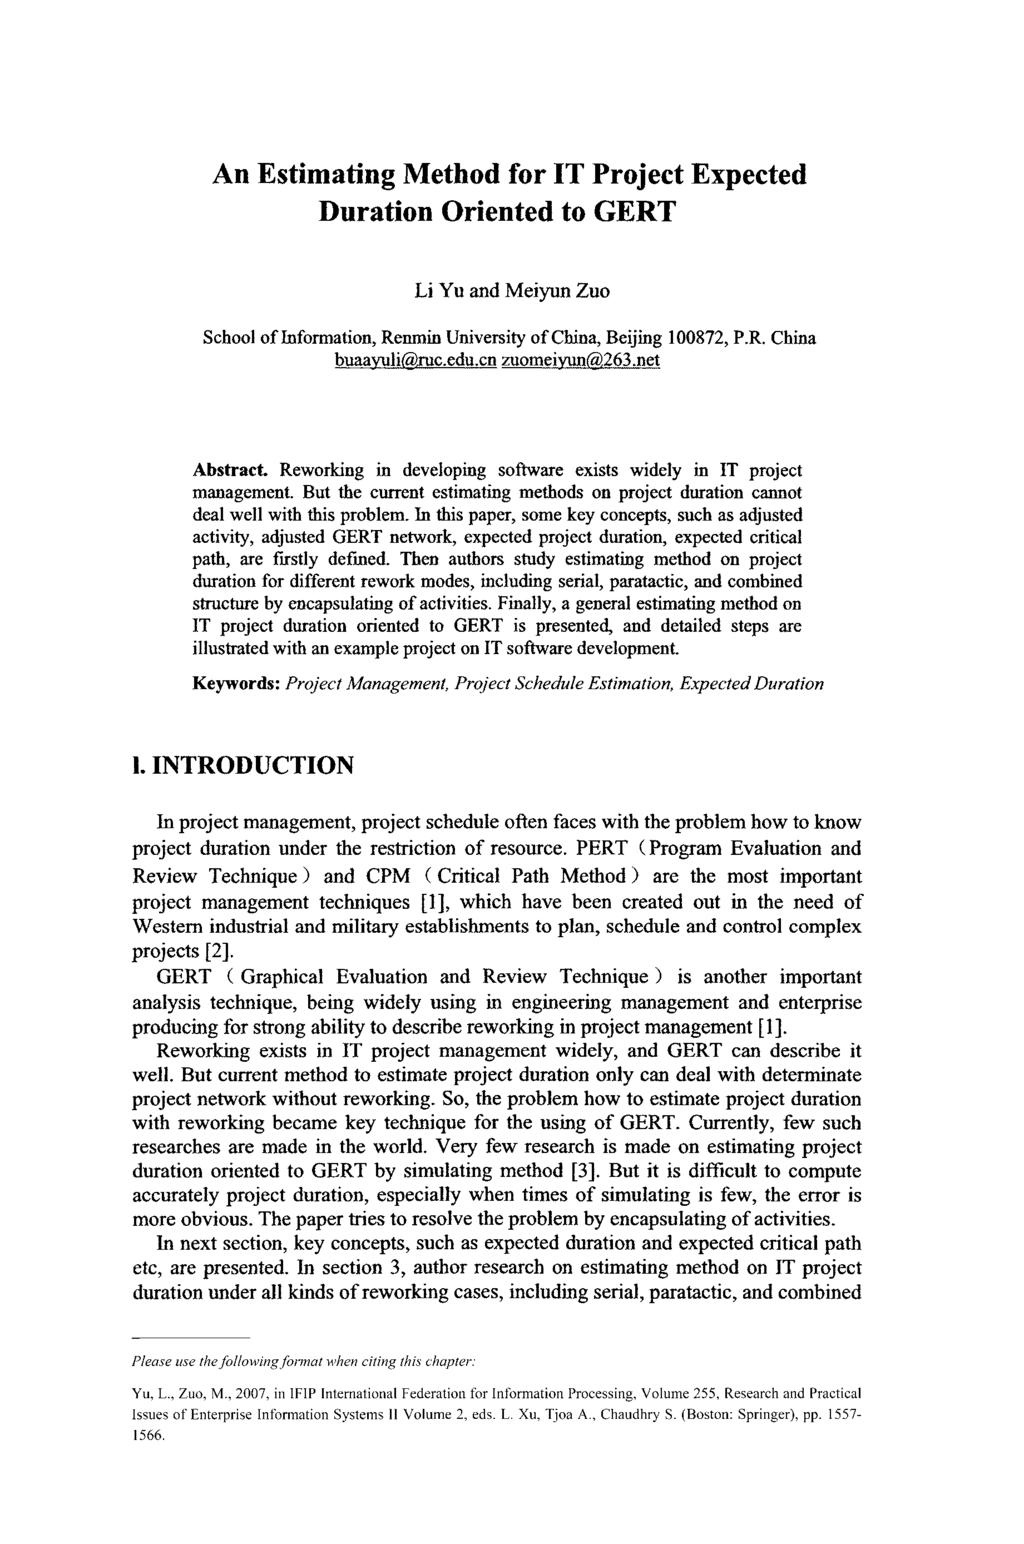 An Estimating Method for IT Project Expected Duration Oriented to GERT Li Yu and Meiyun Zuo School of Information, Renmin University of China, Beijing 100872, P.R. China buaayuli@mc.